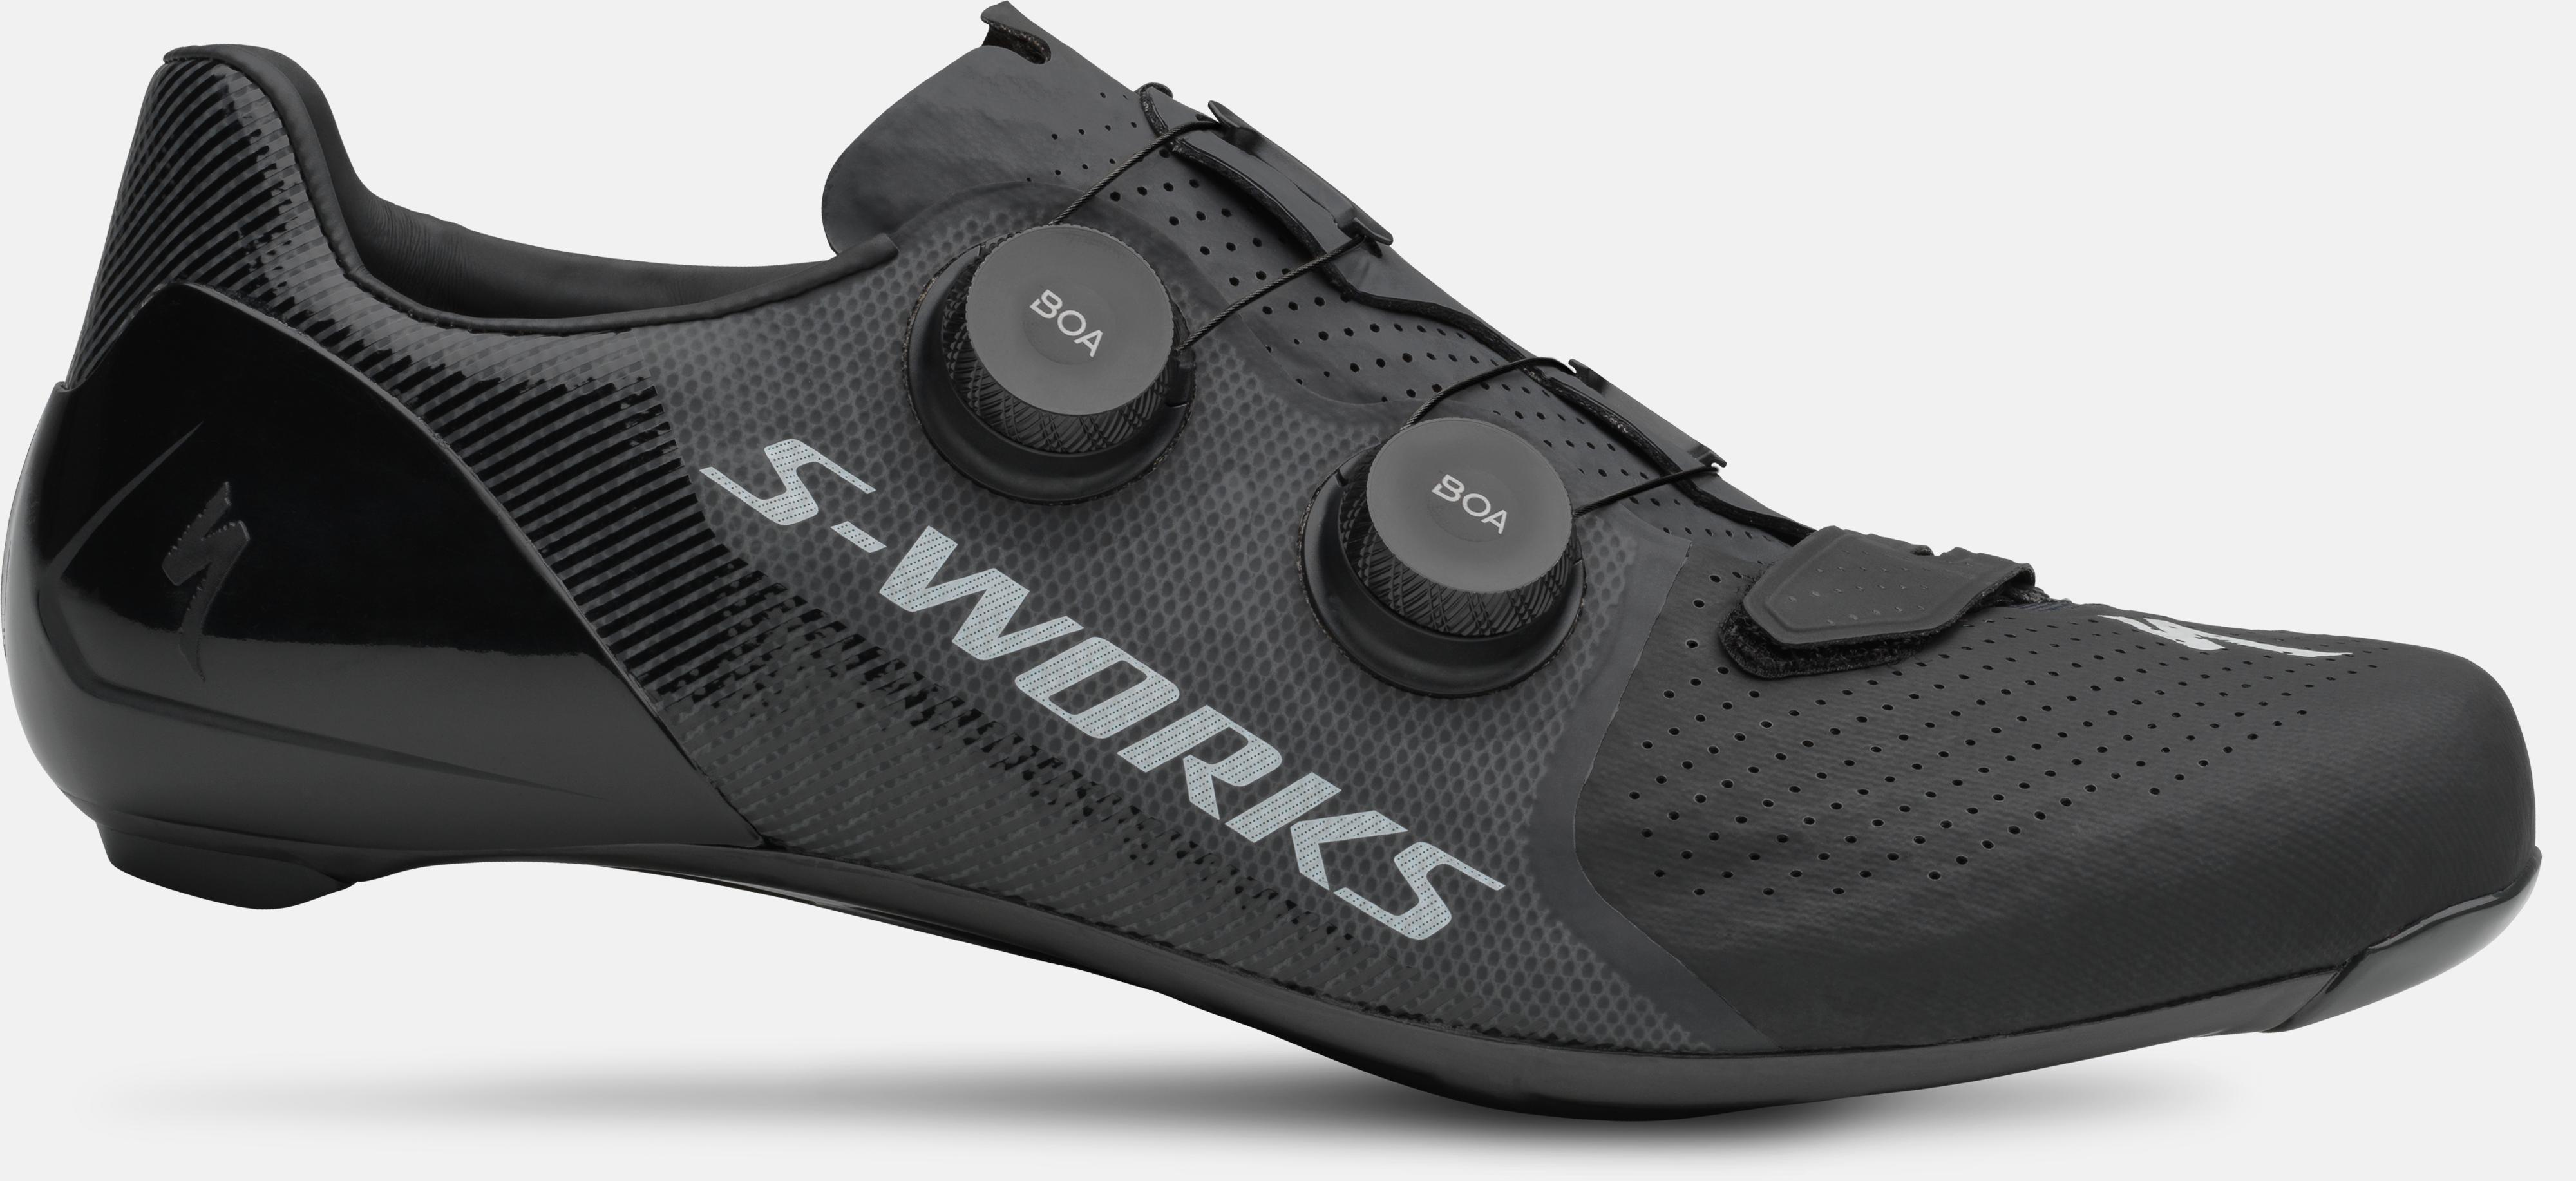 s-works7 rd-